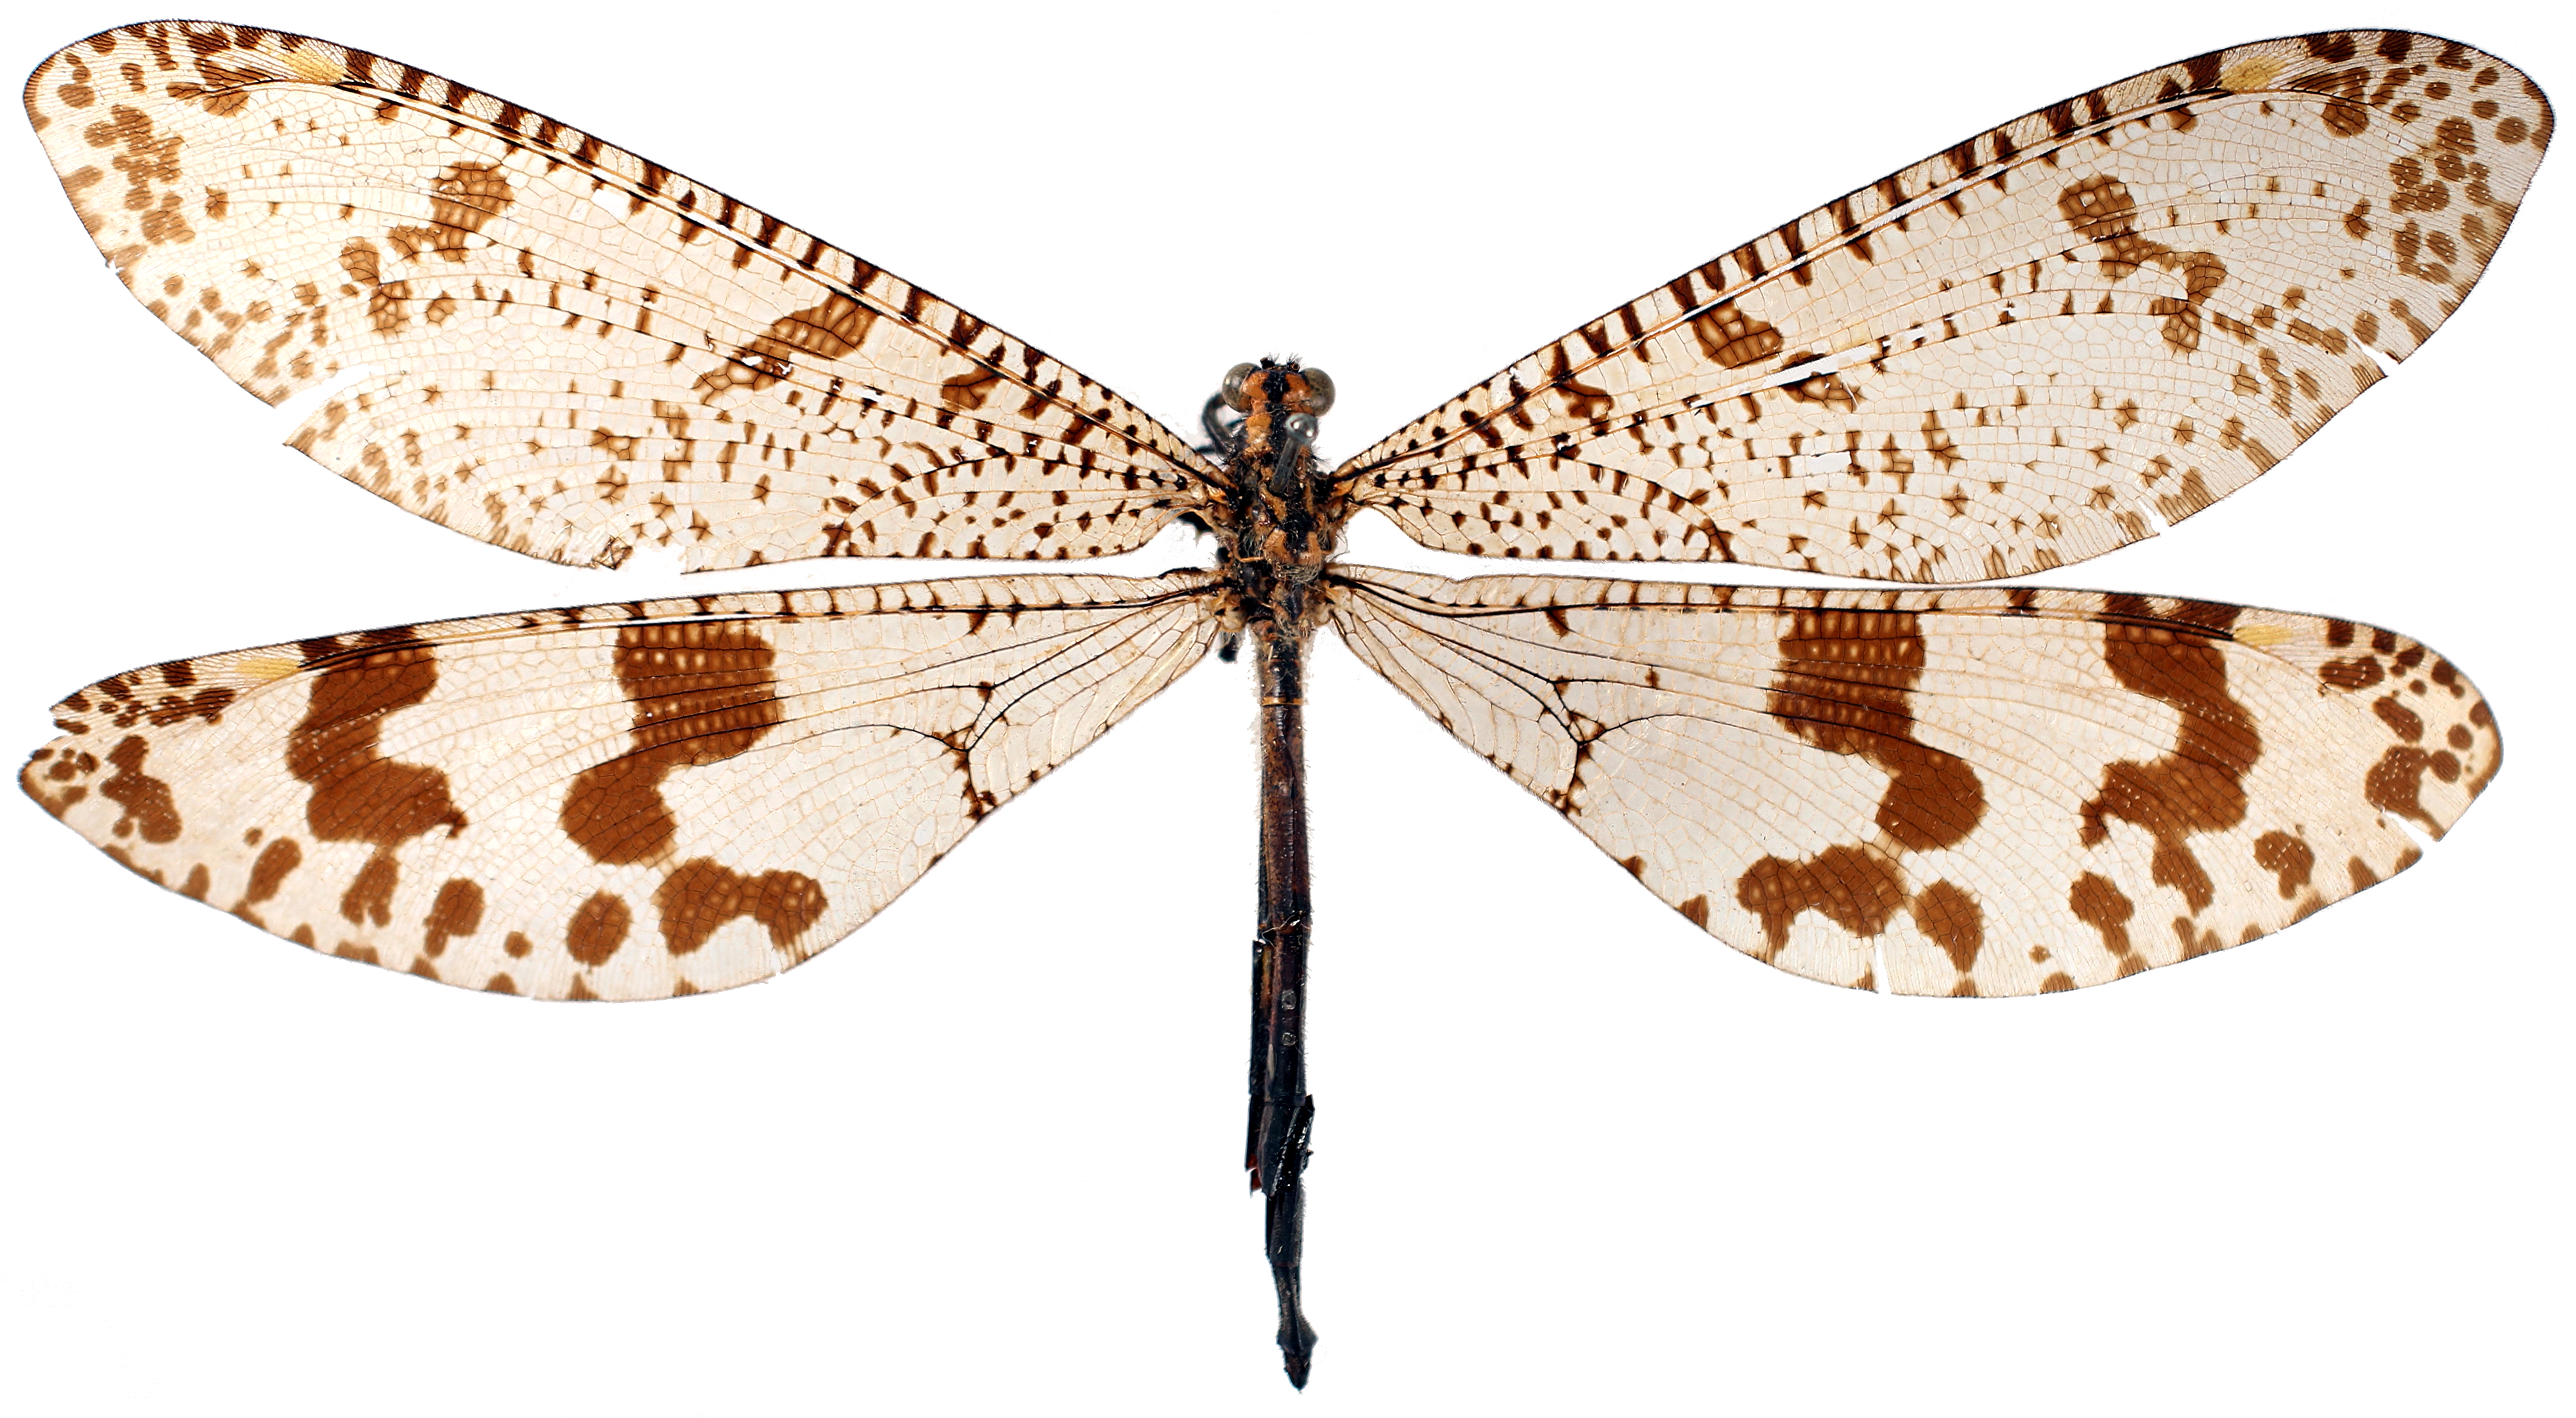 BE-RBINS-ENT Palpares selysi Holotype Female Habitus Jerome Constant.JPG